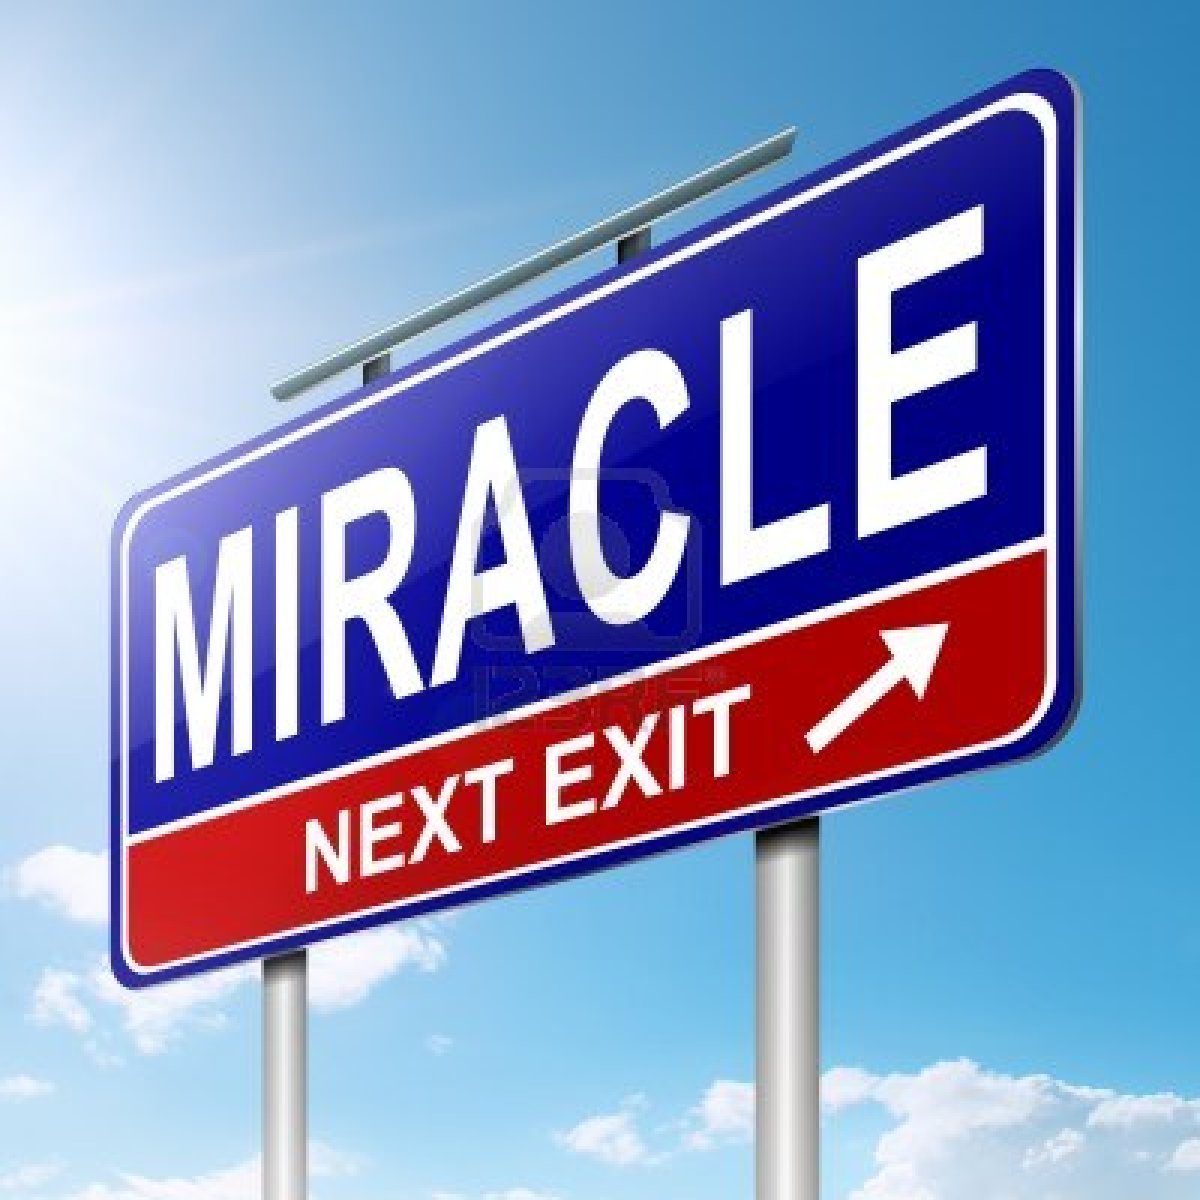 15224895 Illustration Depicting A Roadsign With A Miracle Concept Sky